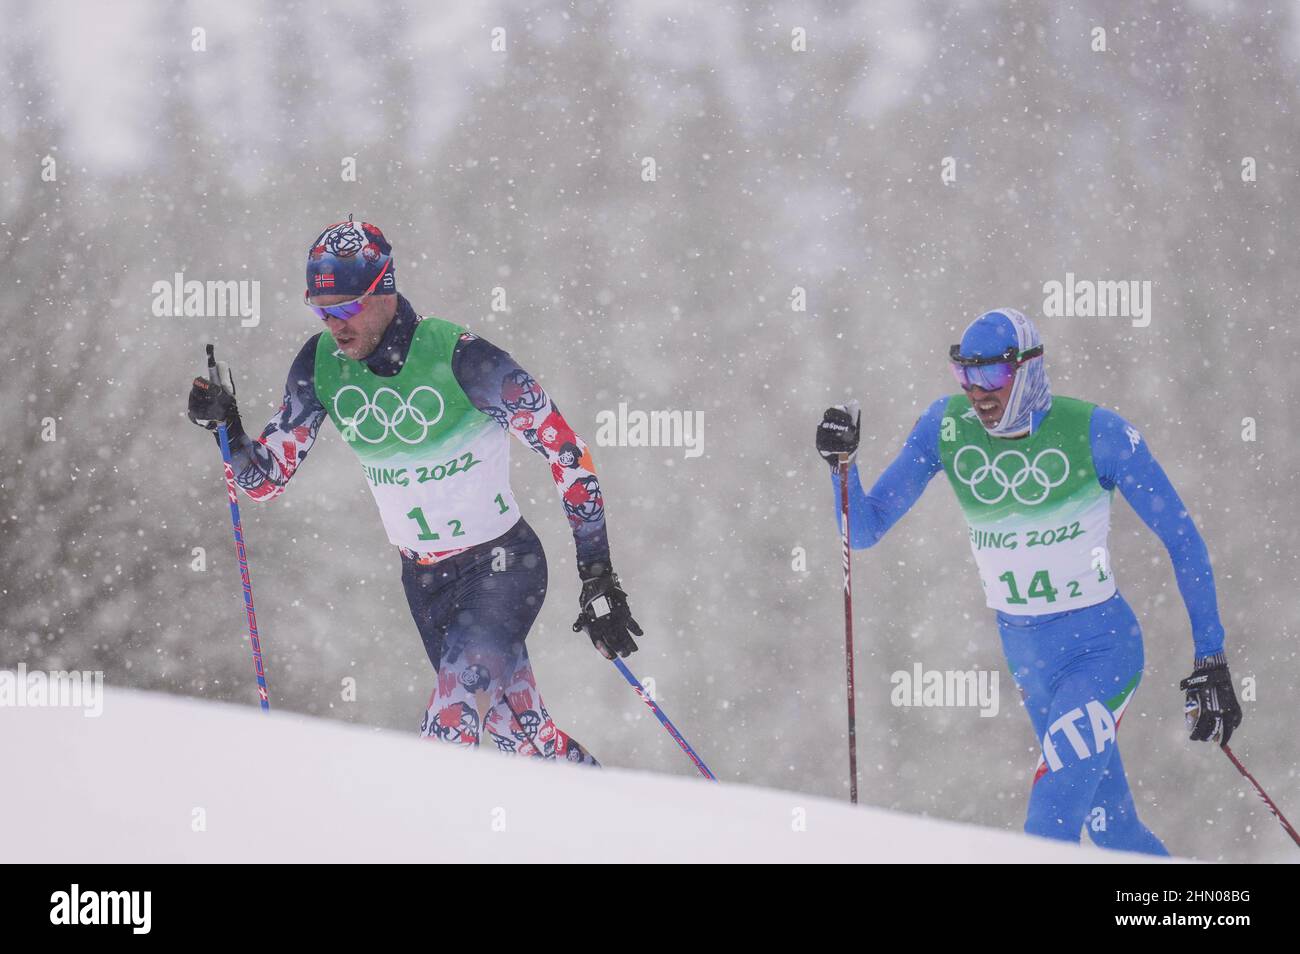 Zhangjiakou, China's Hebei Province. 13th Feb, 2022. Paal Golberg (L) of Norway competes during the cross-country skiing men's 4x10 km relay of the Beijing Winter Olympics at National Cross-Country Skiing Centre in Zhangjiakou, north China's Hebei Province, Feb. 13, 2022. Credit: Hu Huhu/Xinhua/Alamy Live News Stock Photo